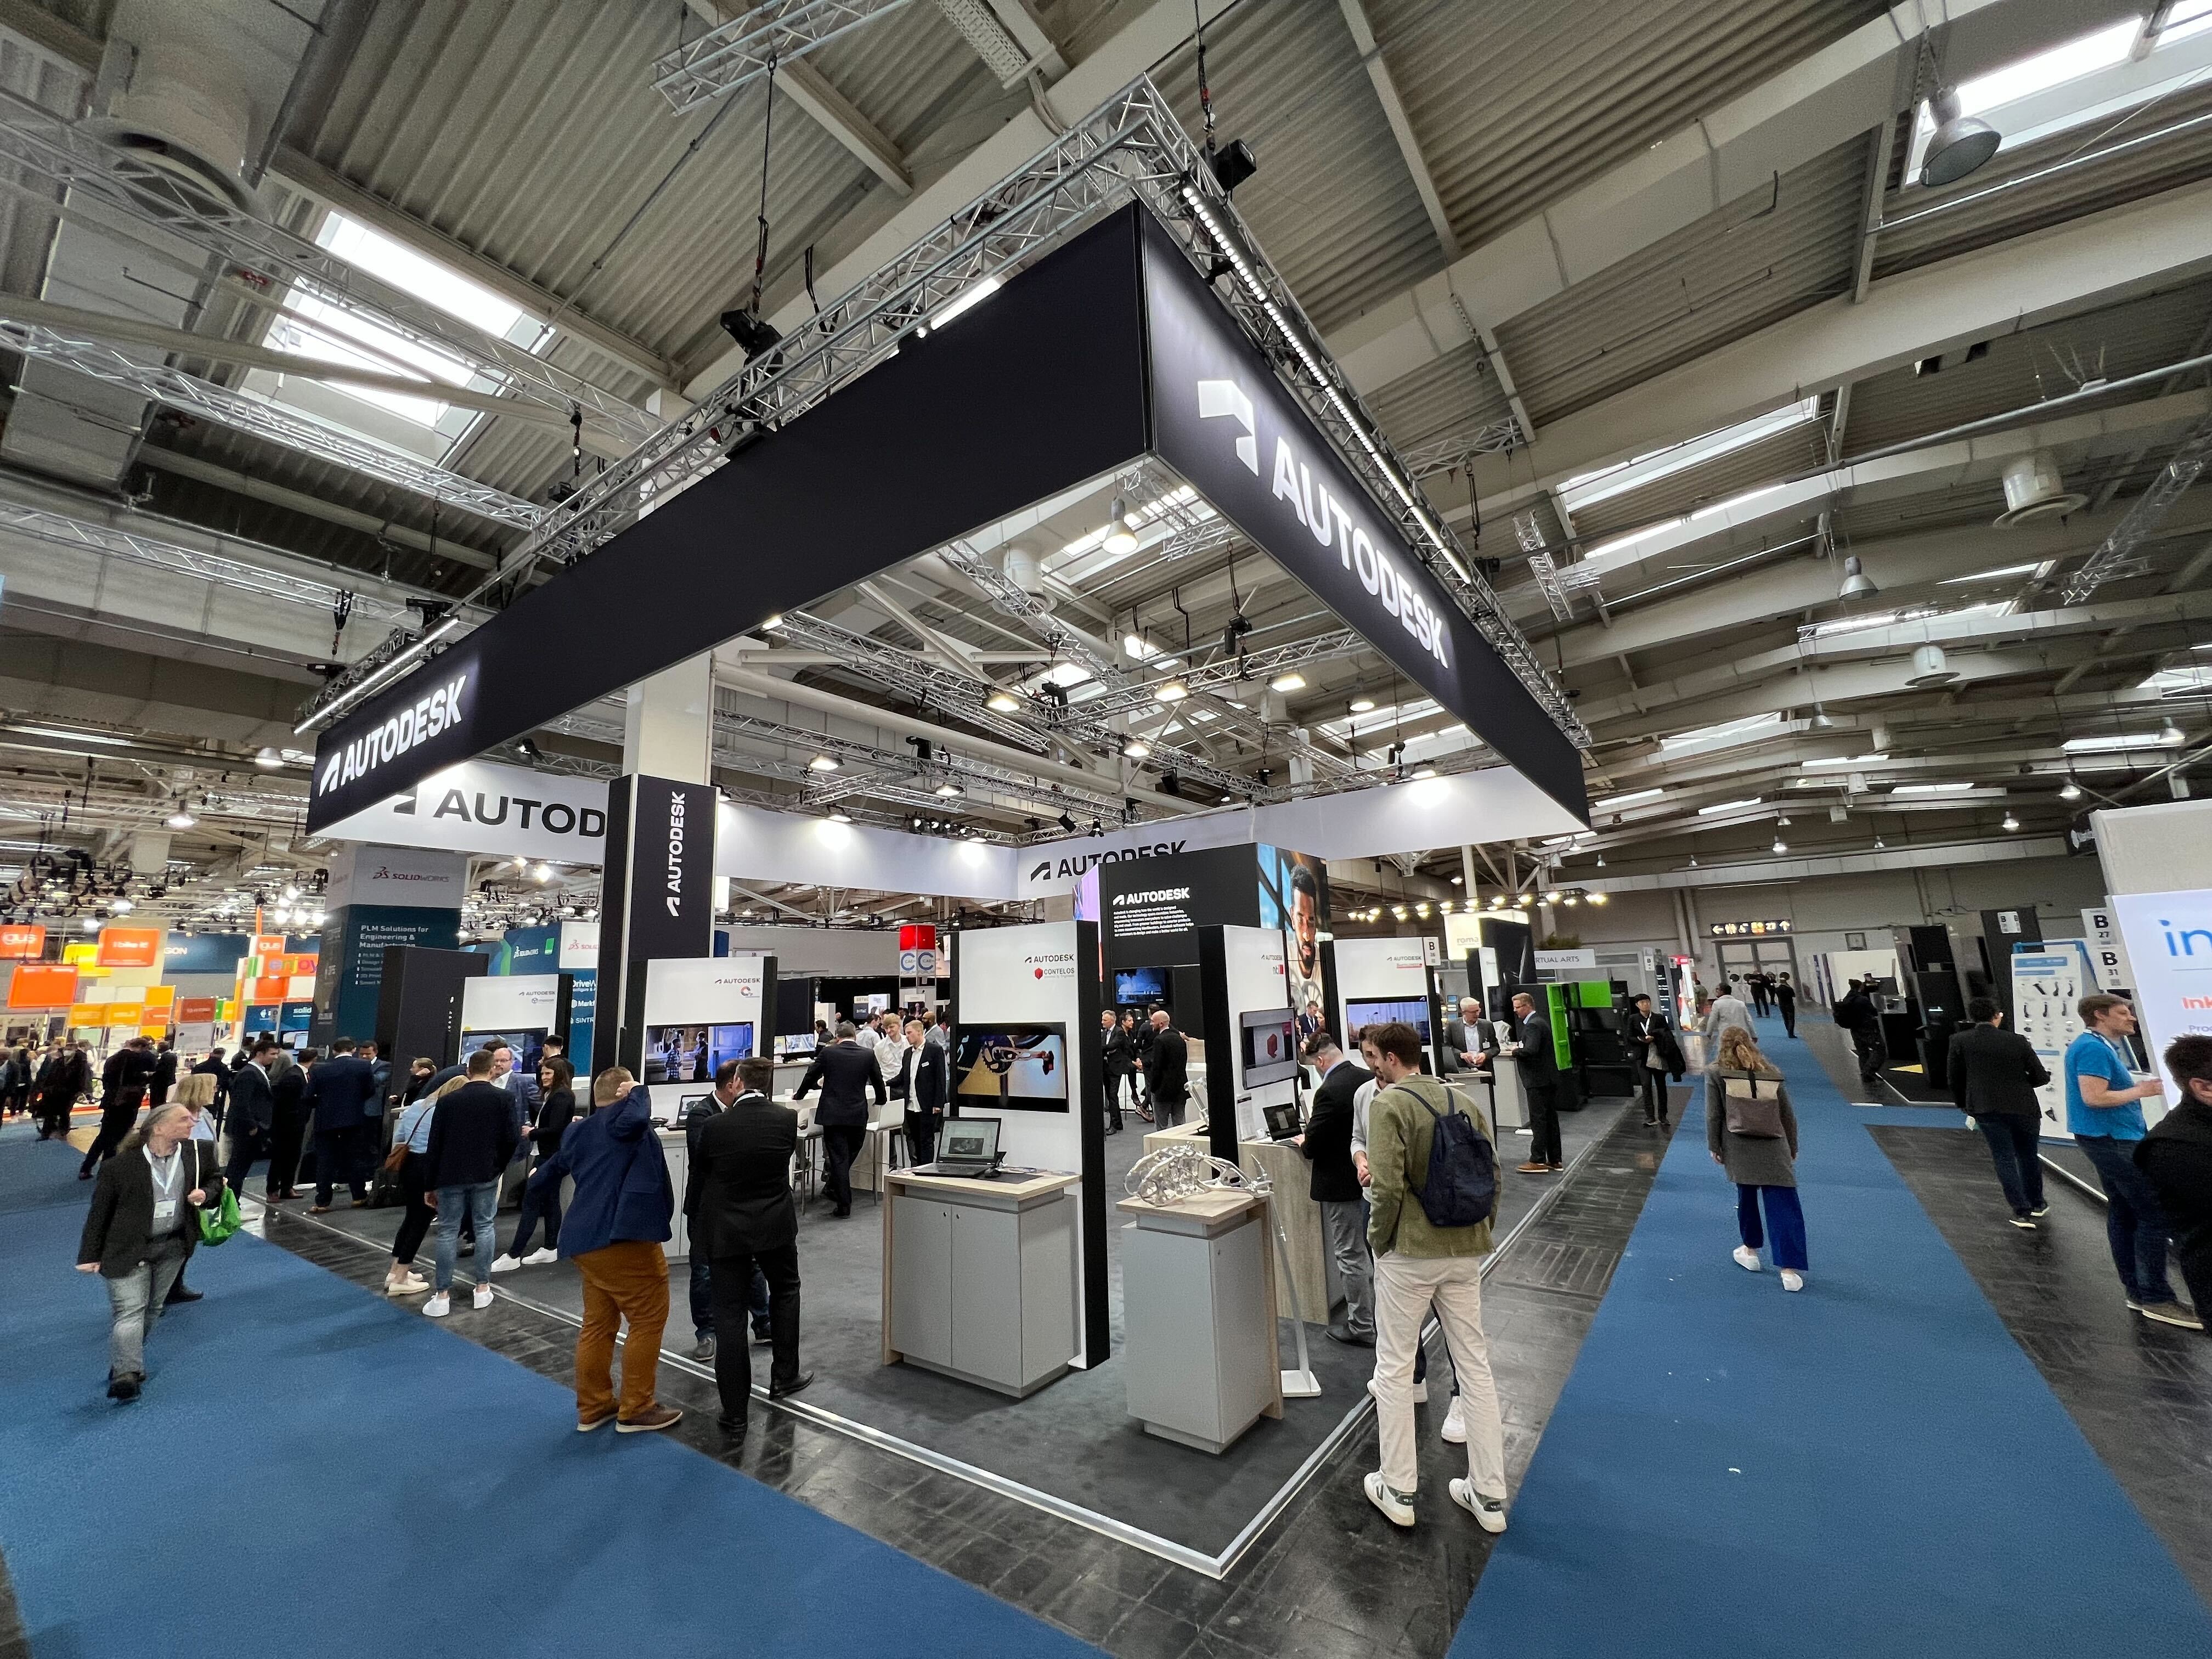 Autodesk exhibition at Hannover Messe 2023